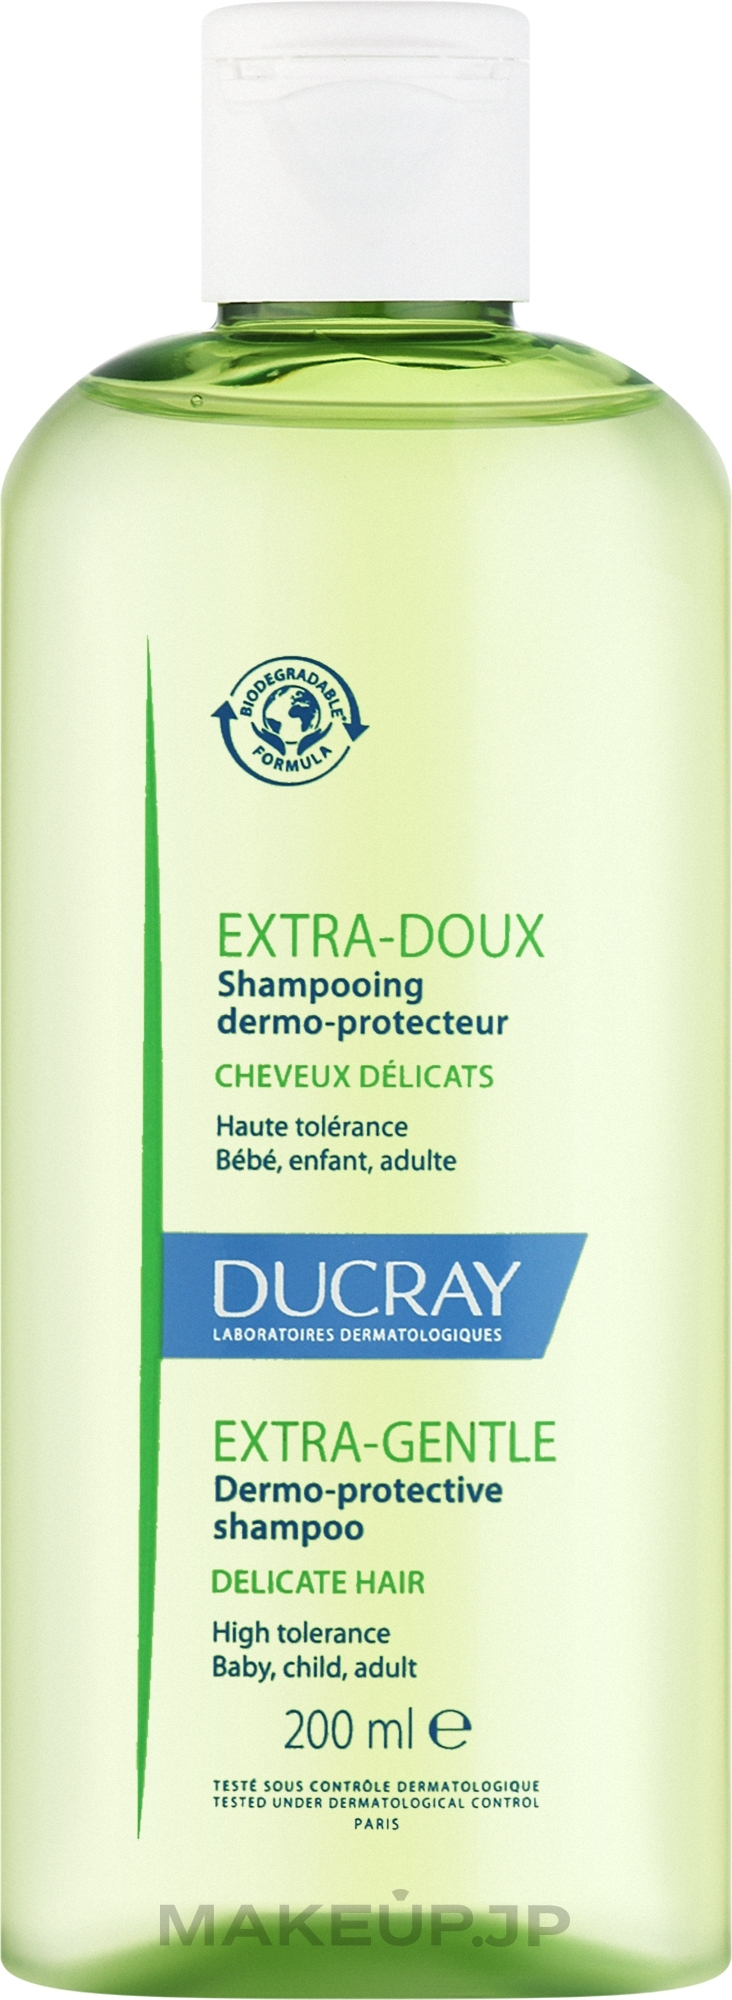 Paraben-Free Protective Shampoo for Frequent Use - Ducray Extra-Doux Shampoo — photo 200 ml